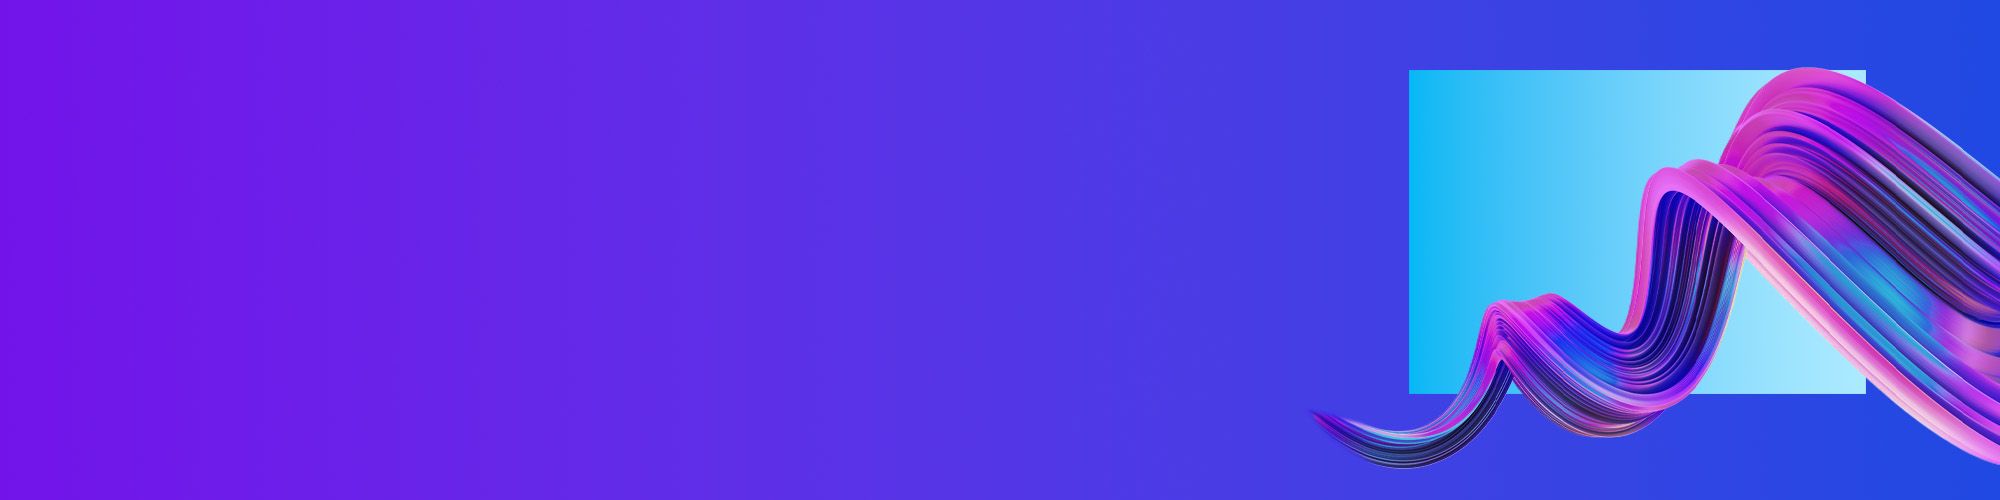 Purple and blue color brush stroke